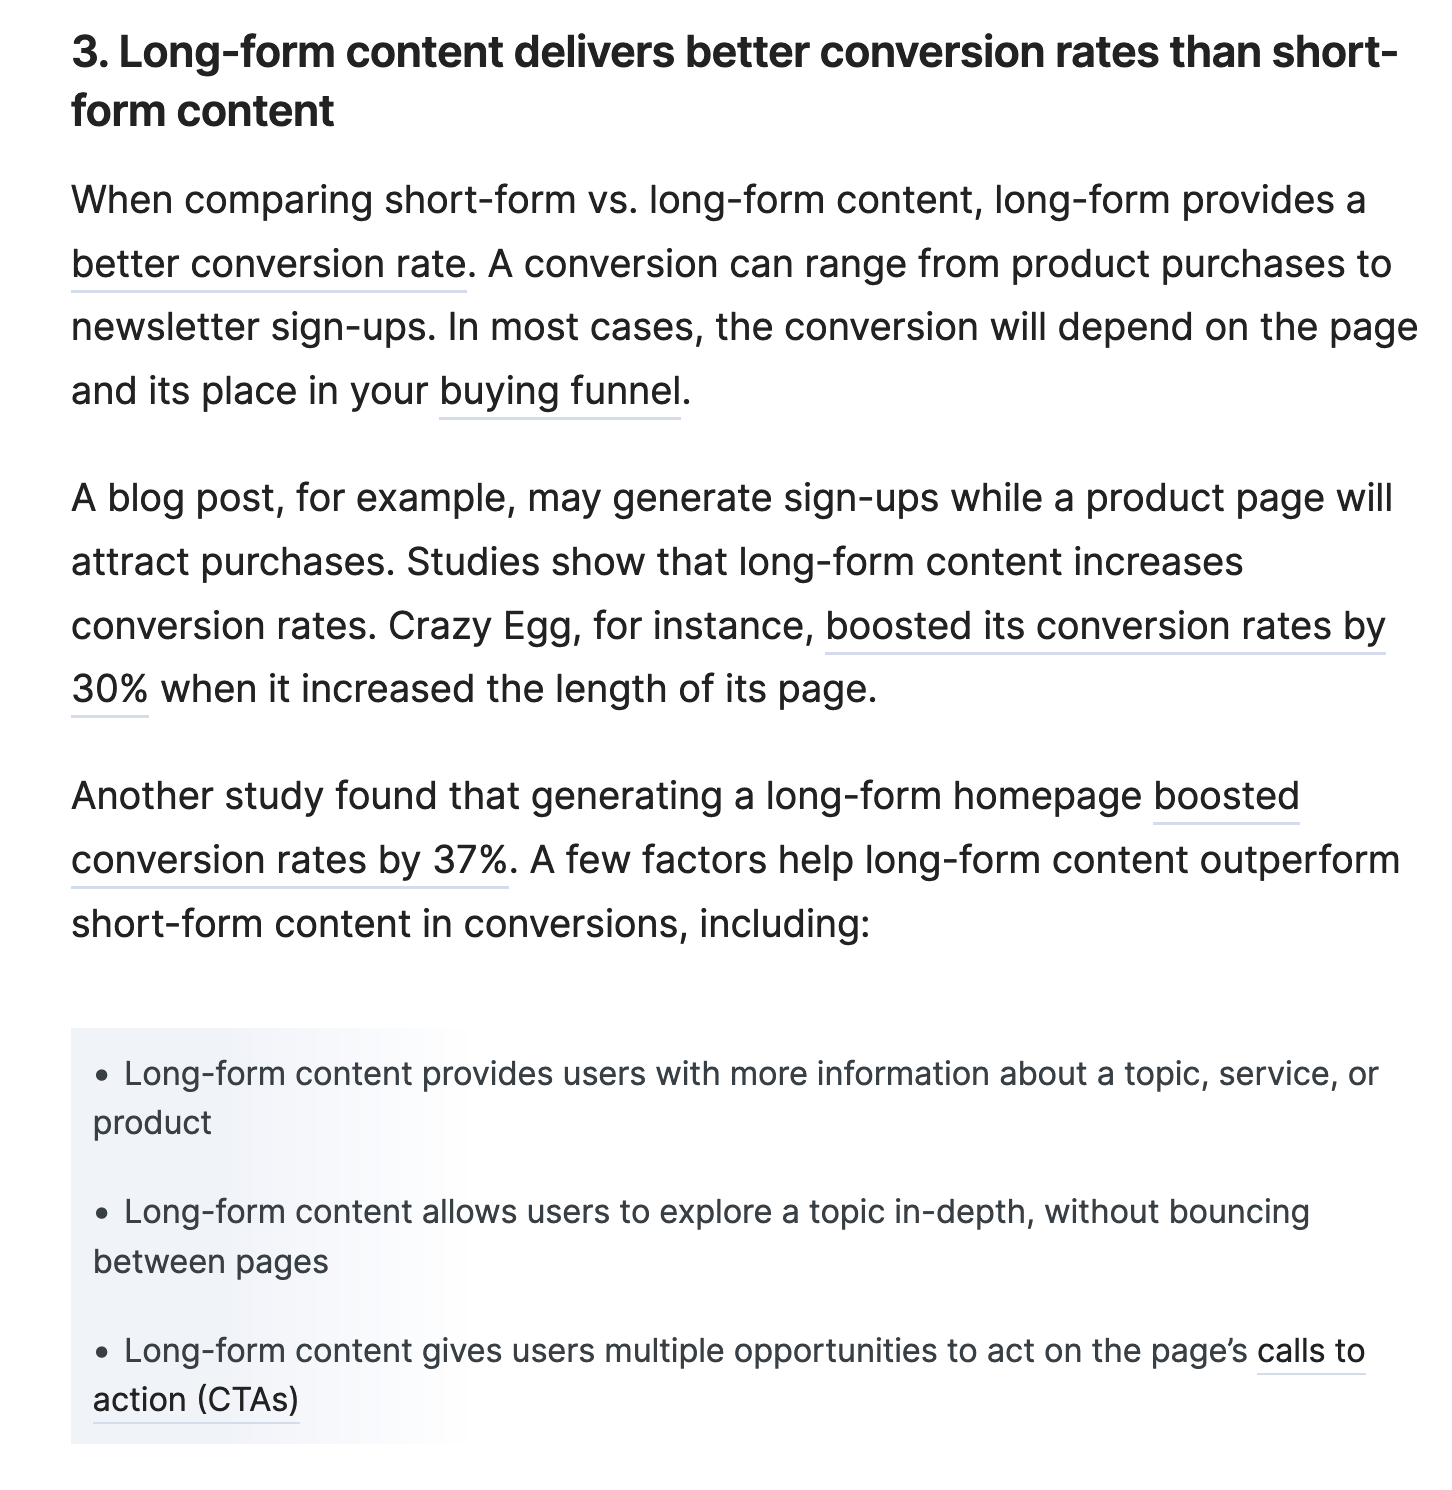 Long-form content delivers better conversion rates than short-form content… A conversion can range from product purchases to newsletter sign-ups. In most cases, the conversion will depend on the page and its place in your buying funnel. A blog post, for example, may generate sign-ups while a product page will attract purchases... Crazy Egg boosted its conversion rates by 30% when it increased the length of its page. Another study found that a long-form homepage boosted conversion rates by 37%.